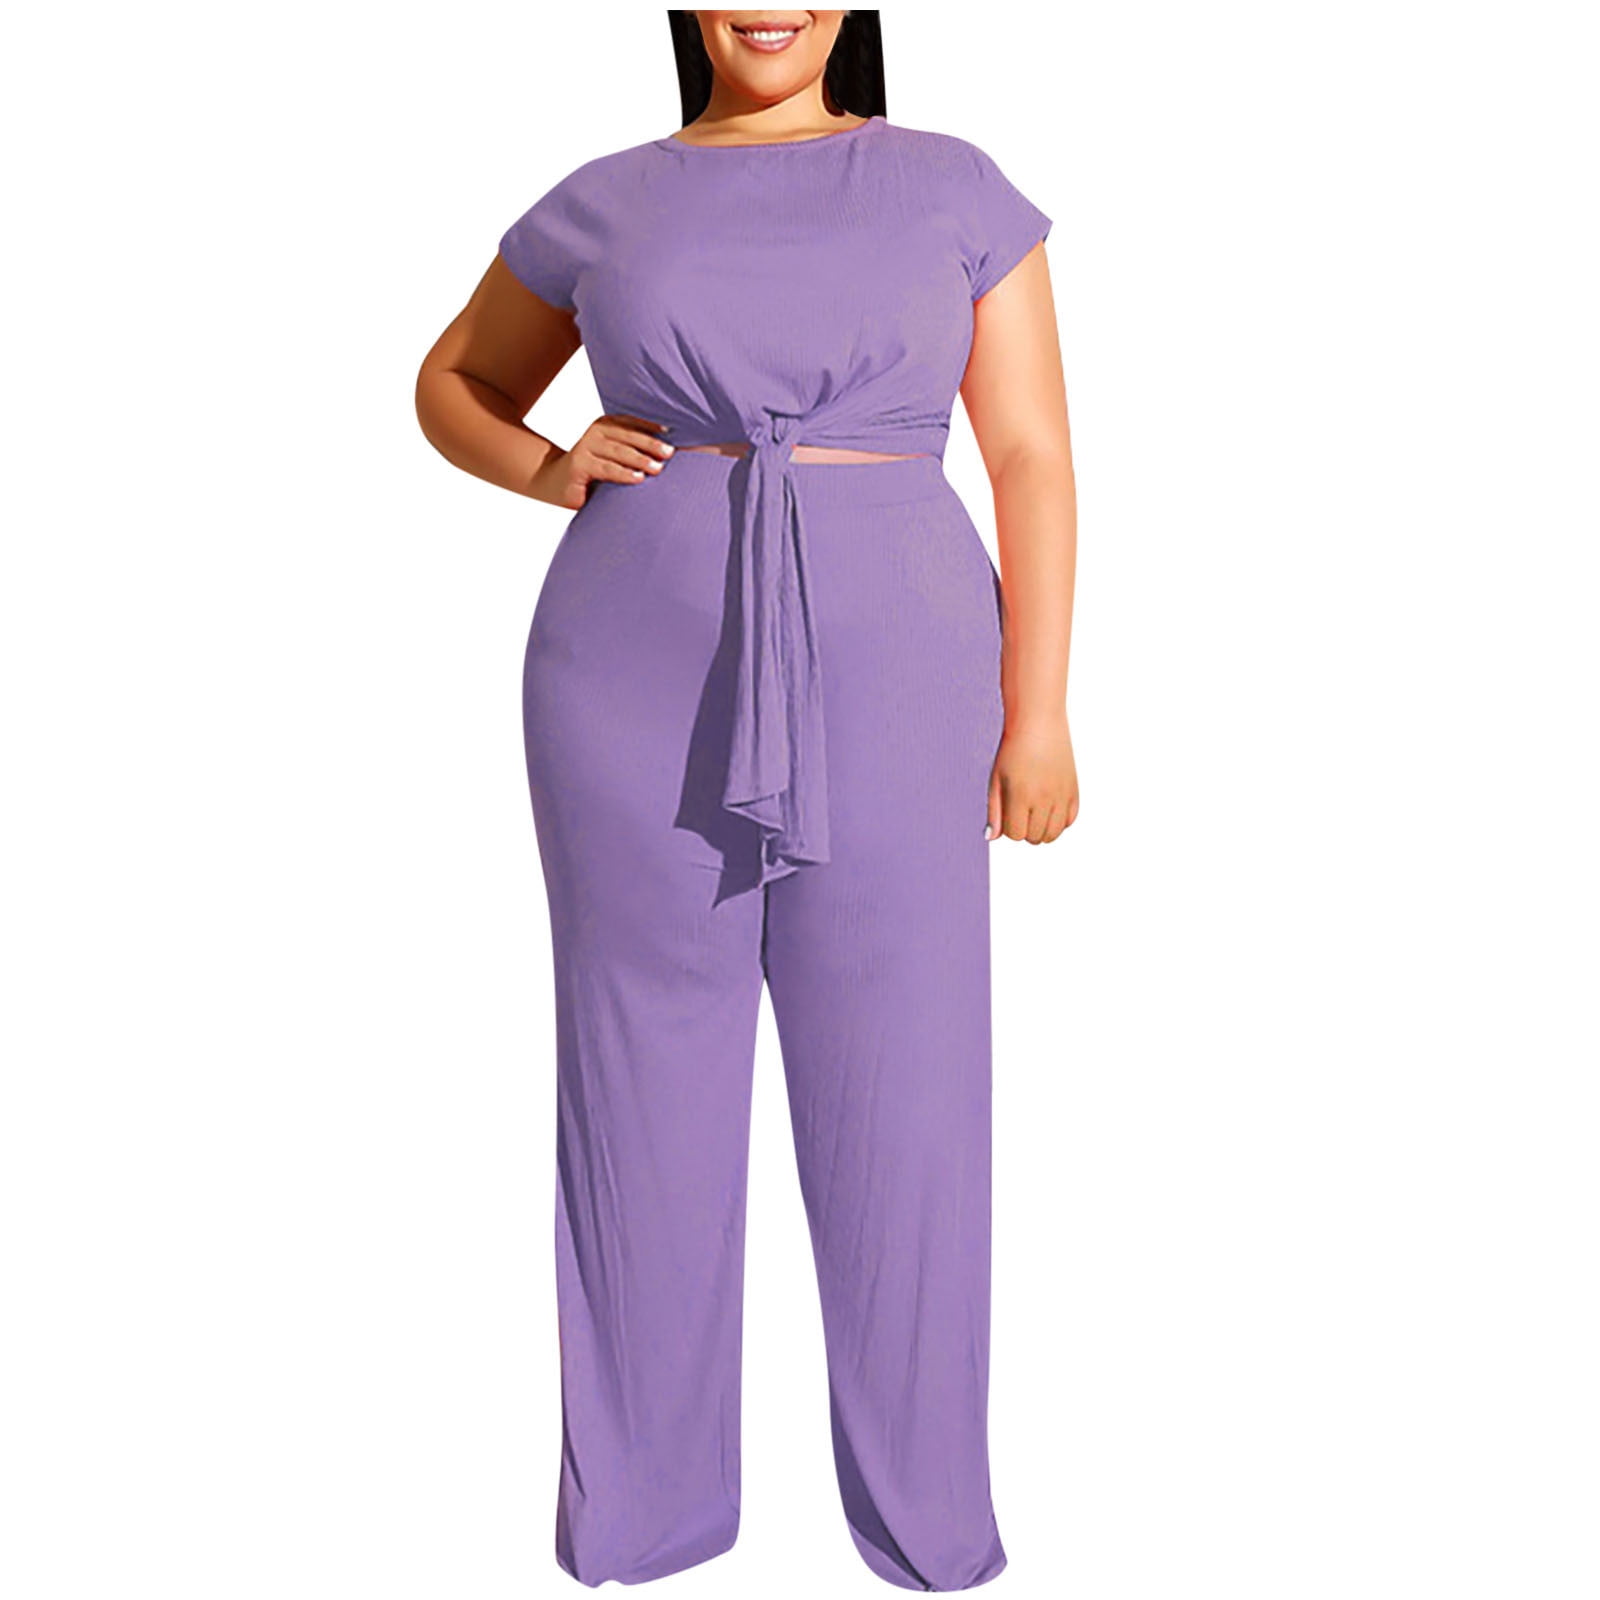 Plus Size 2 Piece Outfits for Women Short Sleeve Tied Knot Crop